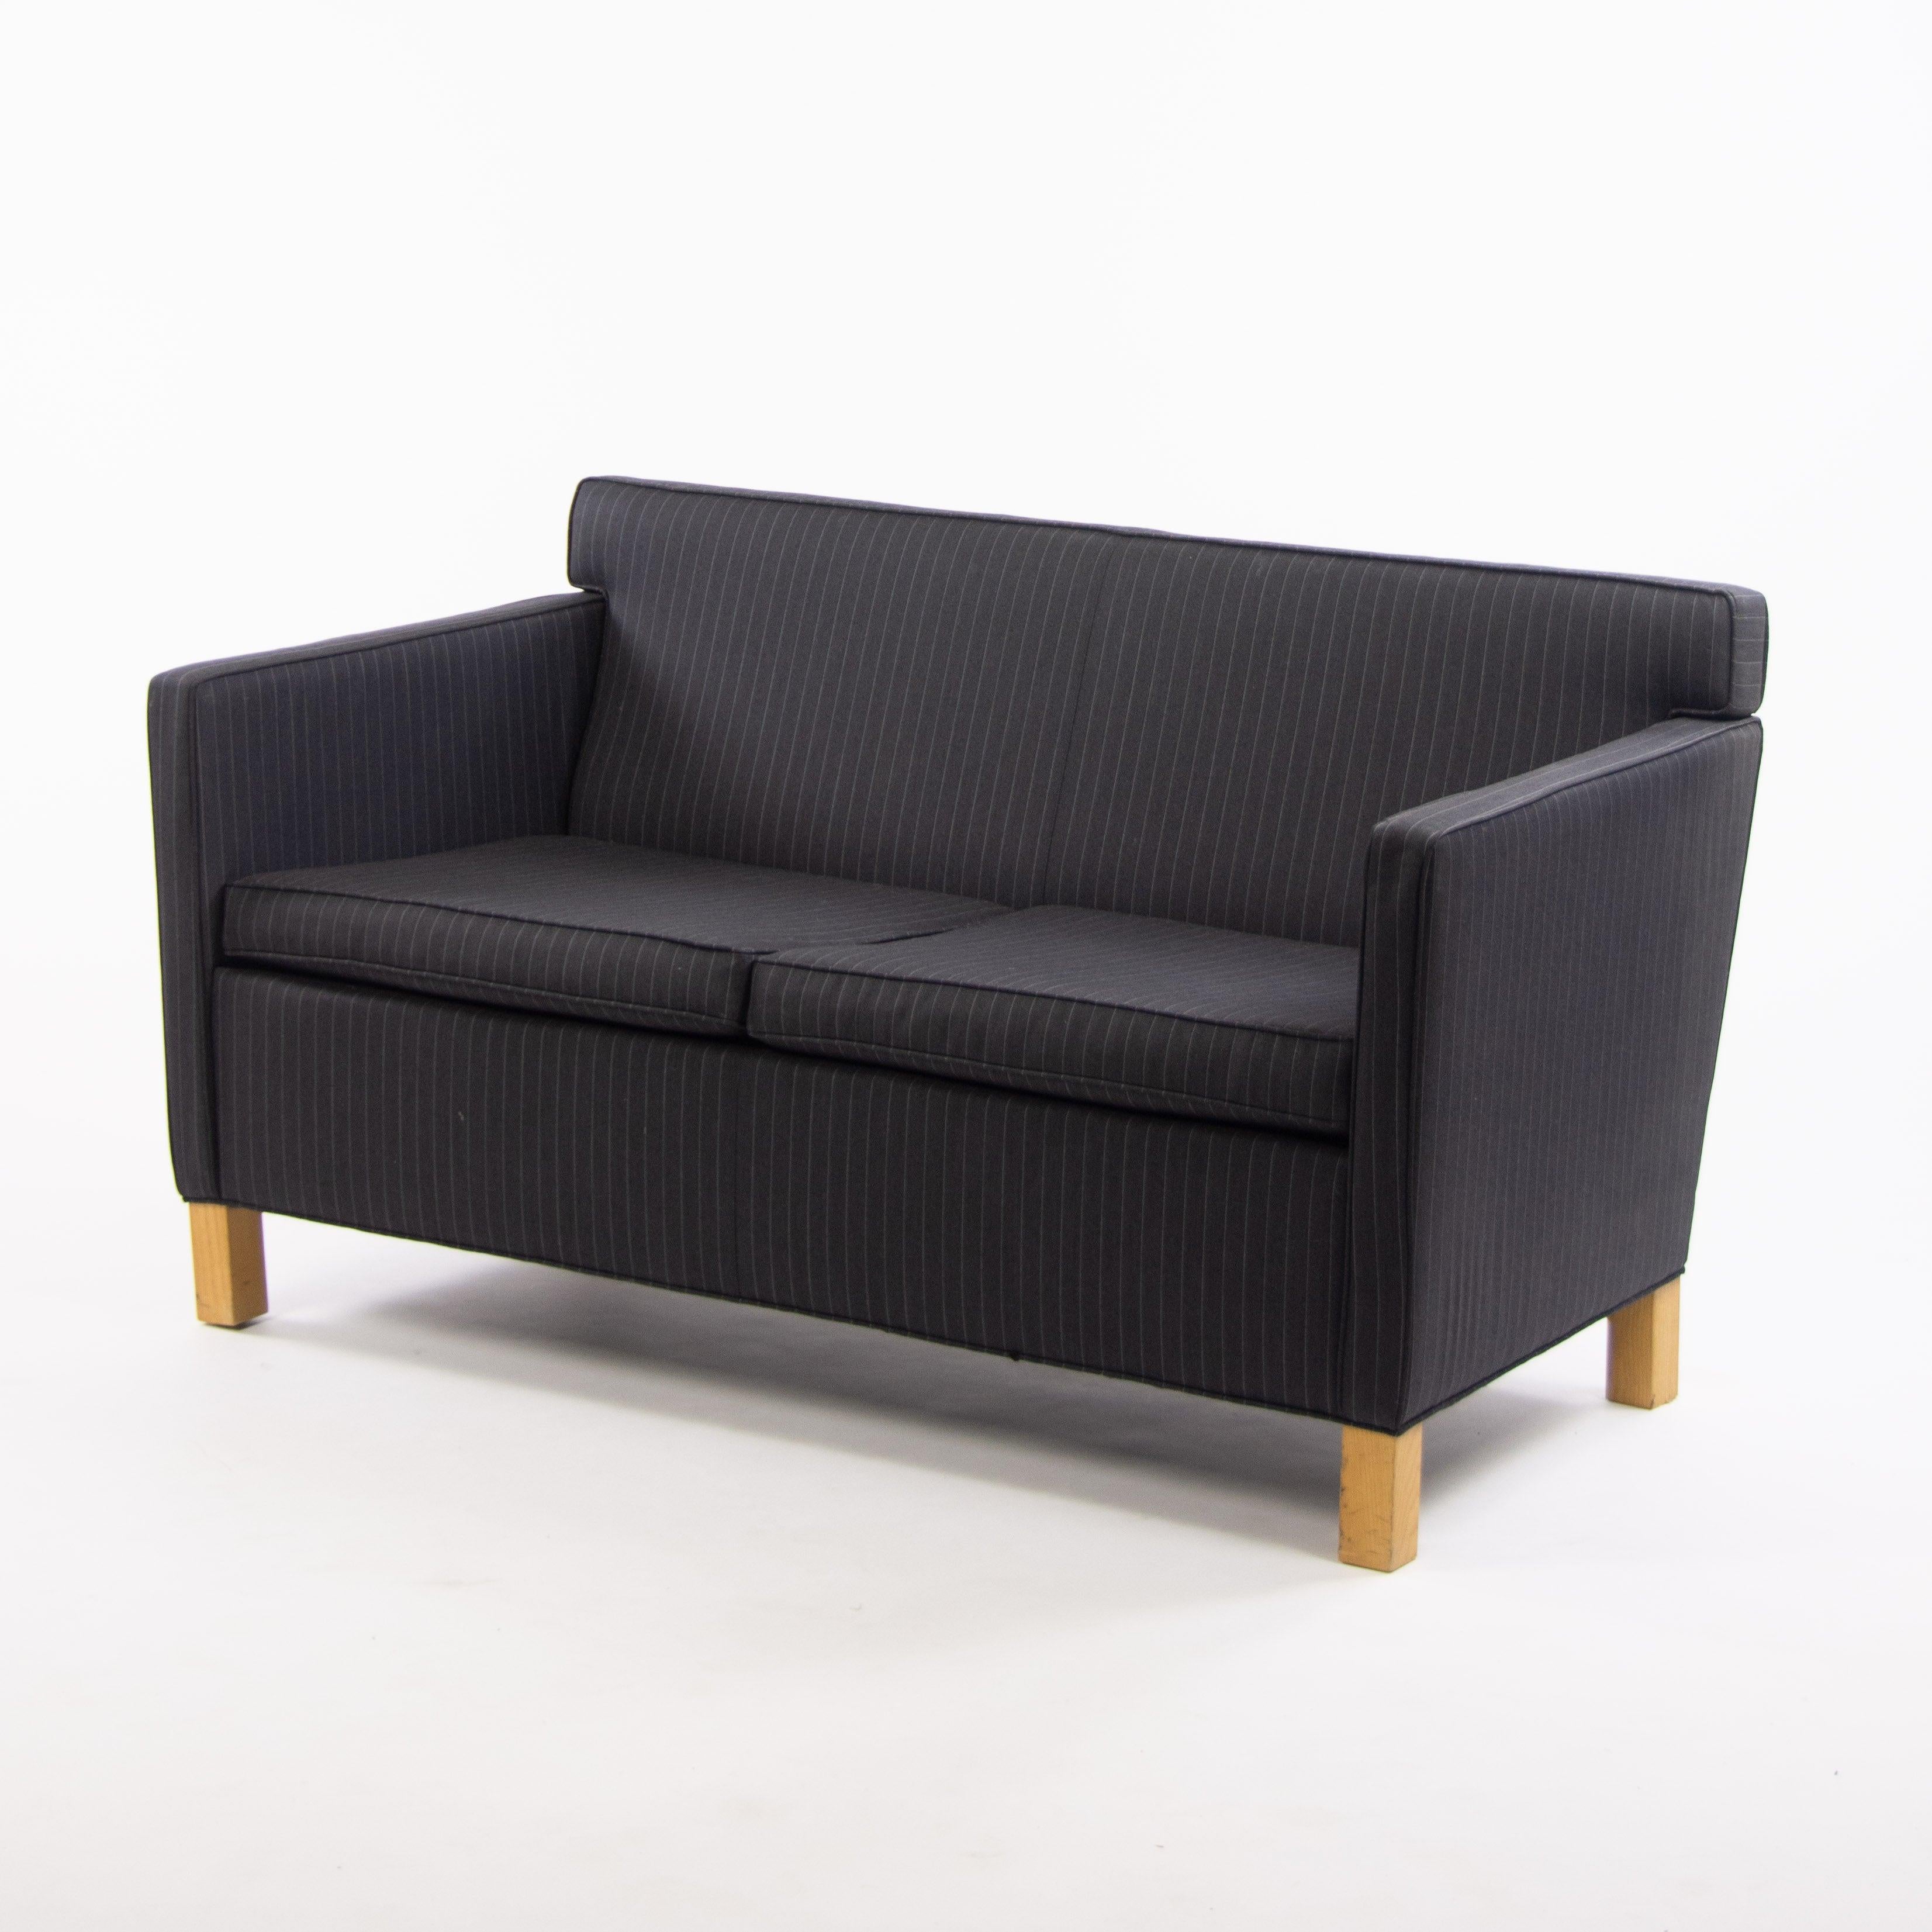 Listed for sale is a (sold separately) gorgeous and original Mies Van Der Rohe Krefeld Sofa, produced by Knoll.

Multiples of these two-seater sofas are available if desired in identical black fabric. Please inquire if interested in a